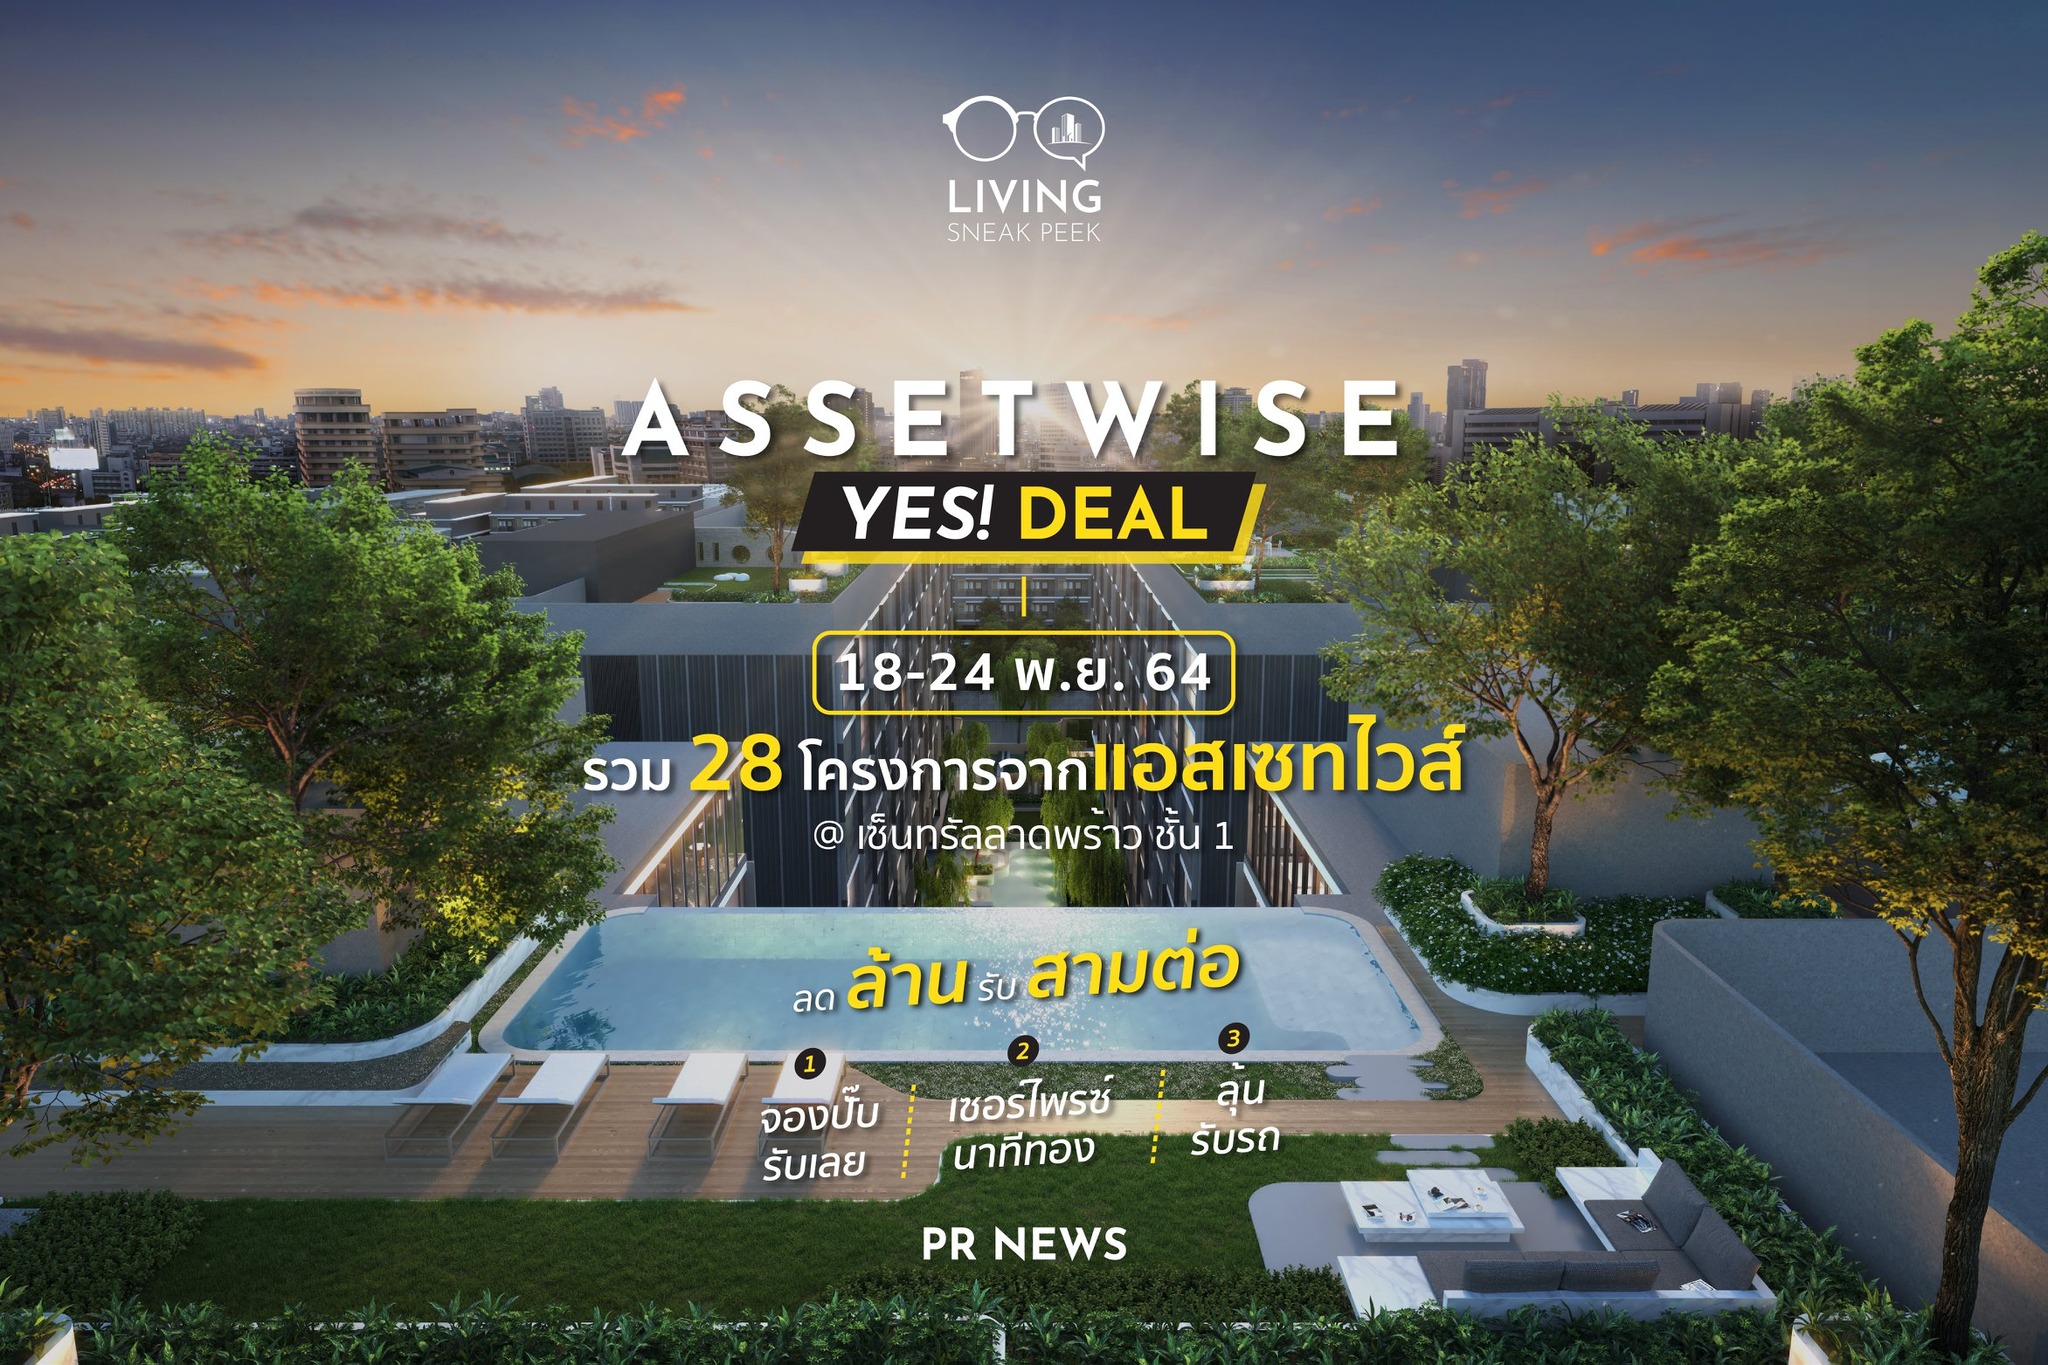 AssetWise YES! DEAL